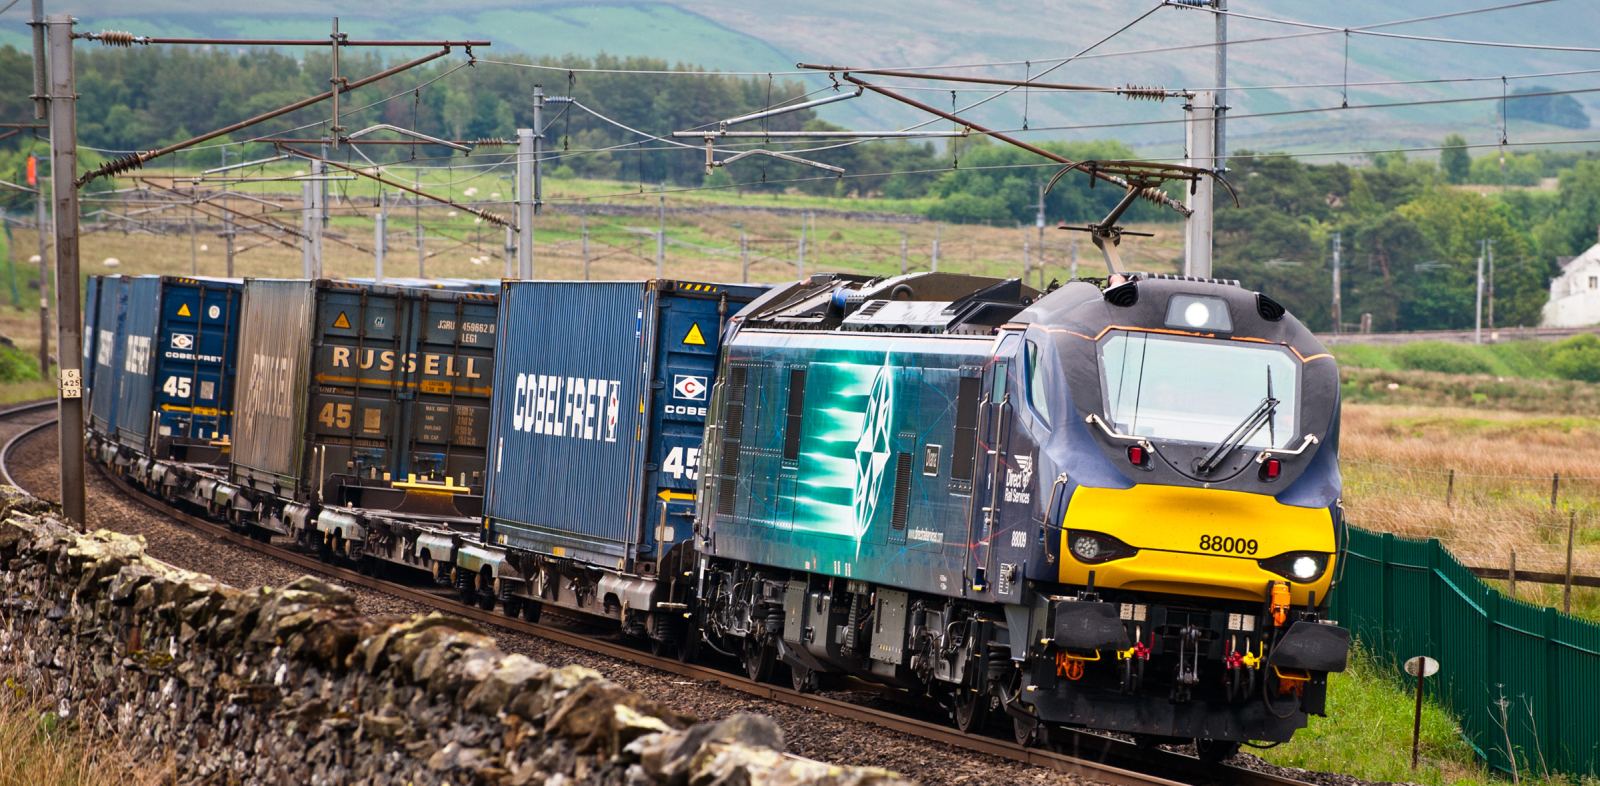 88009 “Diana” with a container train in June 2020 at Scout Green